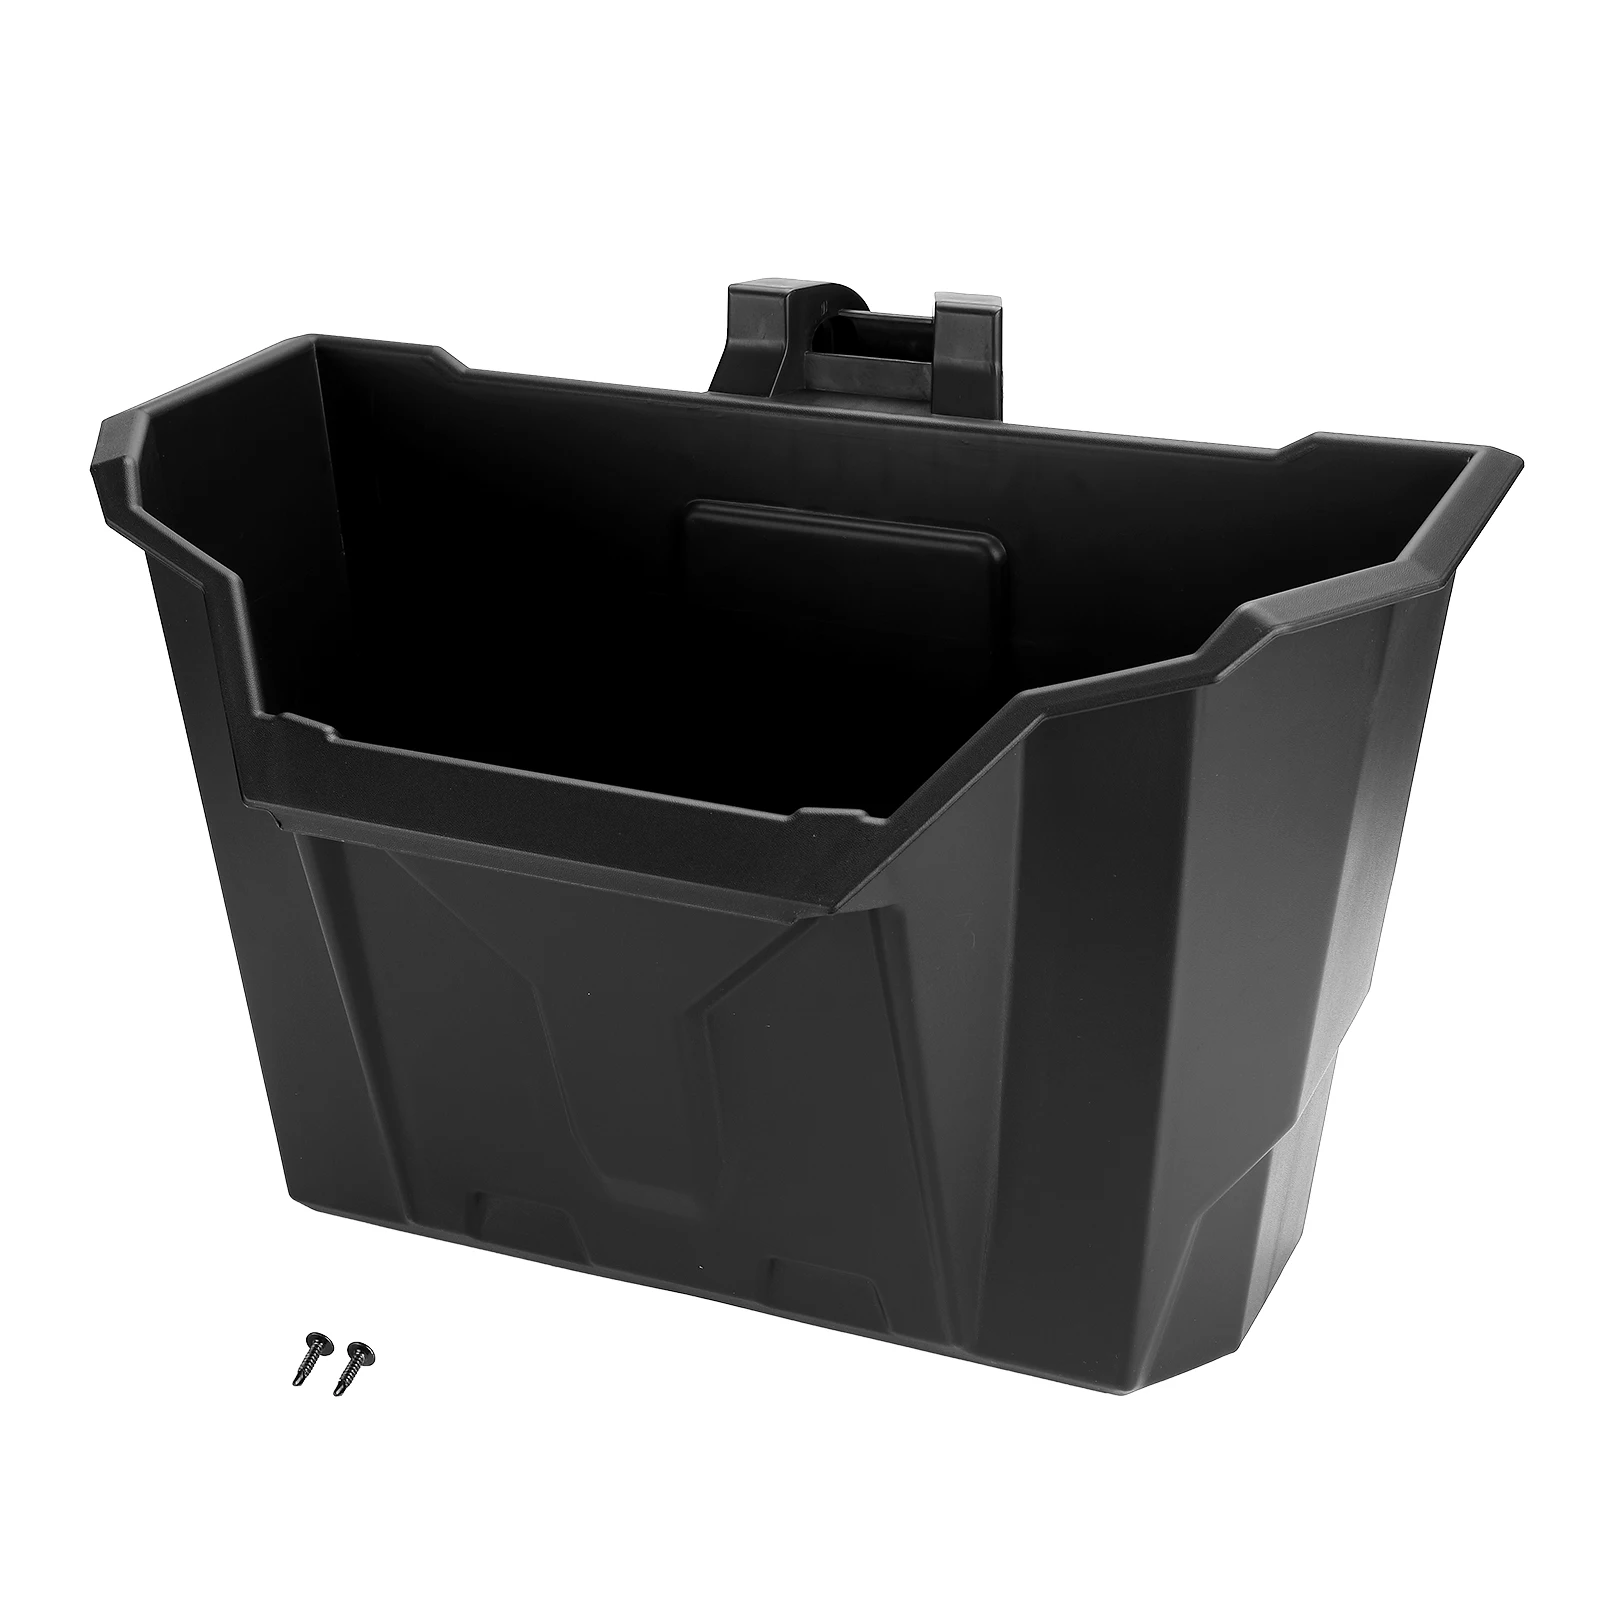 UTV 15L/8L Under-seat Storage Box Without Lid For Can-Am Defender Defender MAX DH8 DH10 715003399 715003446